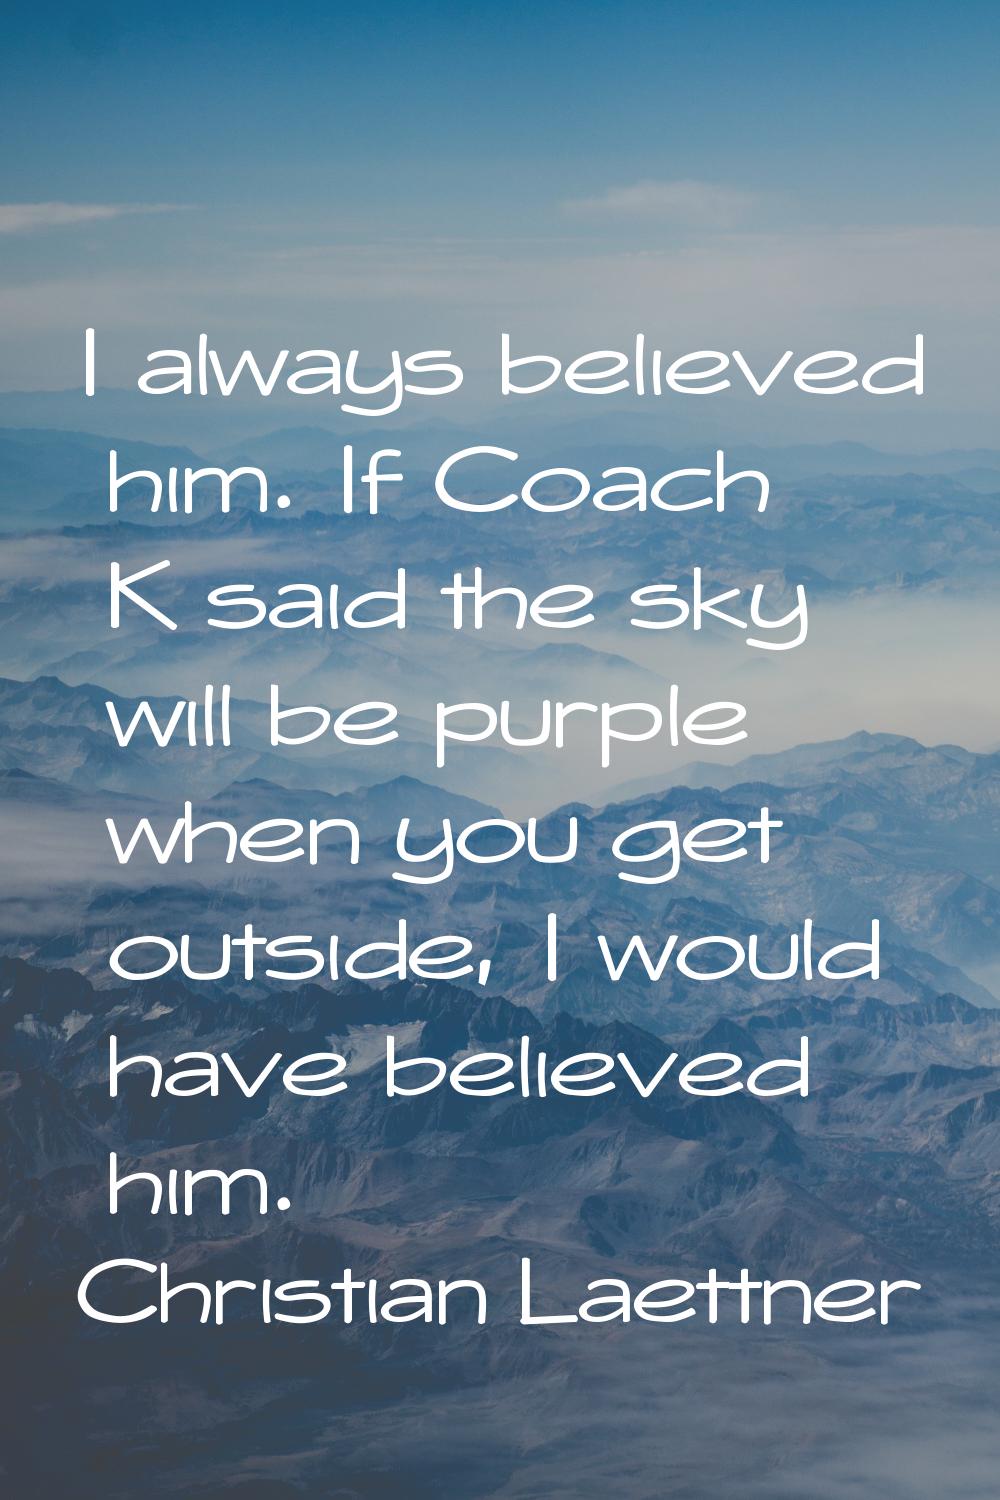 I always believed him. If Coach K said the sky will be purple when you get outside, I would have be